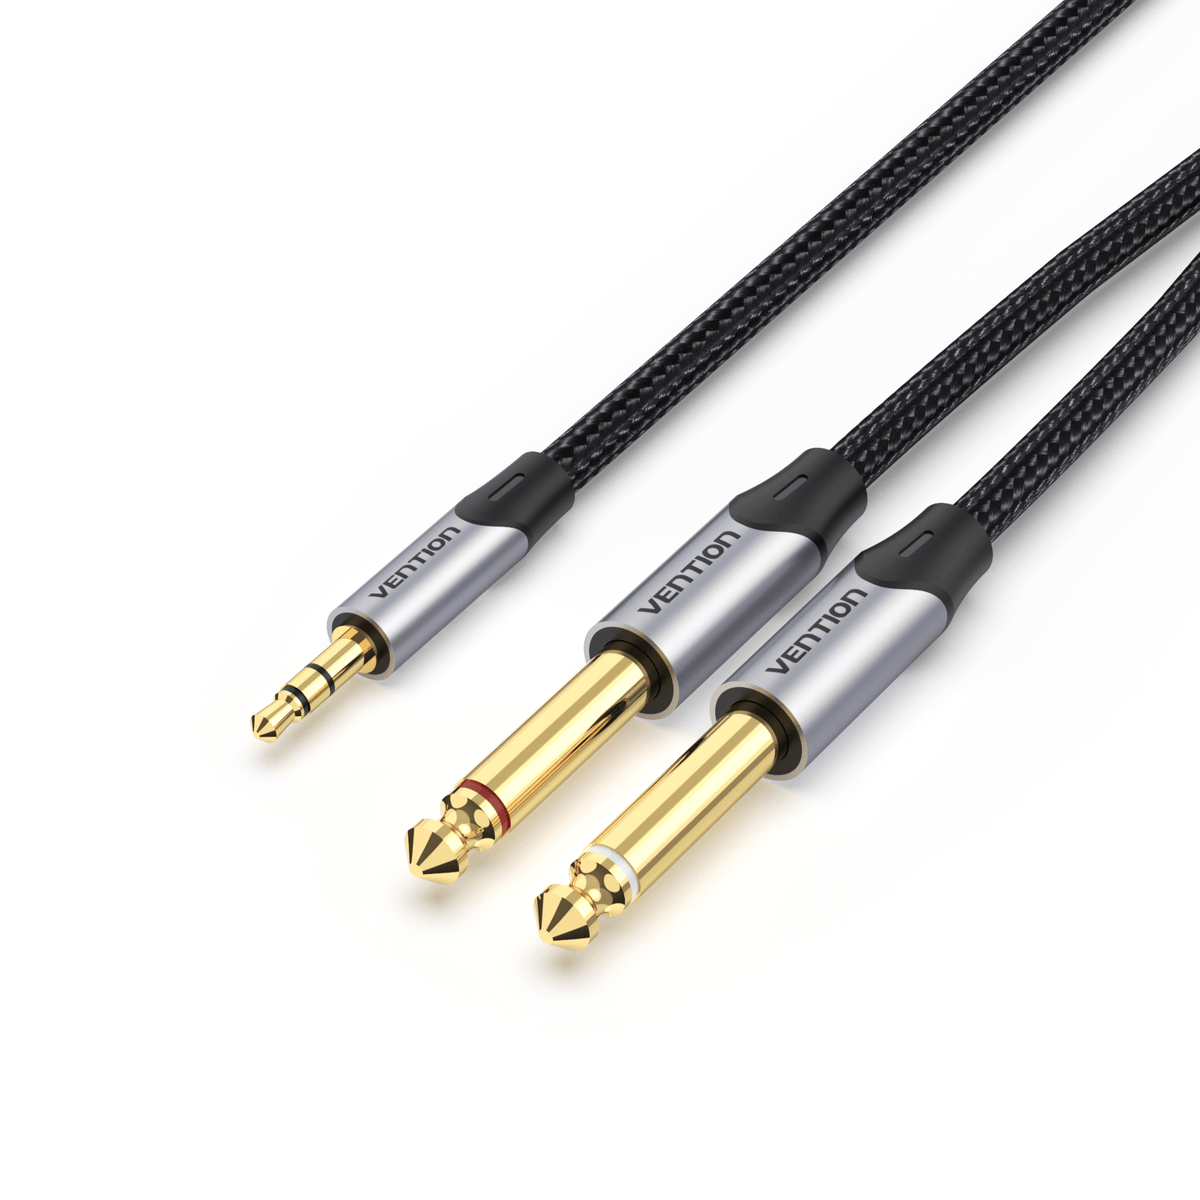 Kan ikke læse eller skrive svag Temerity 3.5mm to Double 6.5mm TRS Cable AUX Male Mono 6.5 Jack to Stereo 3.5 J